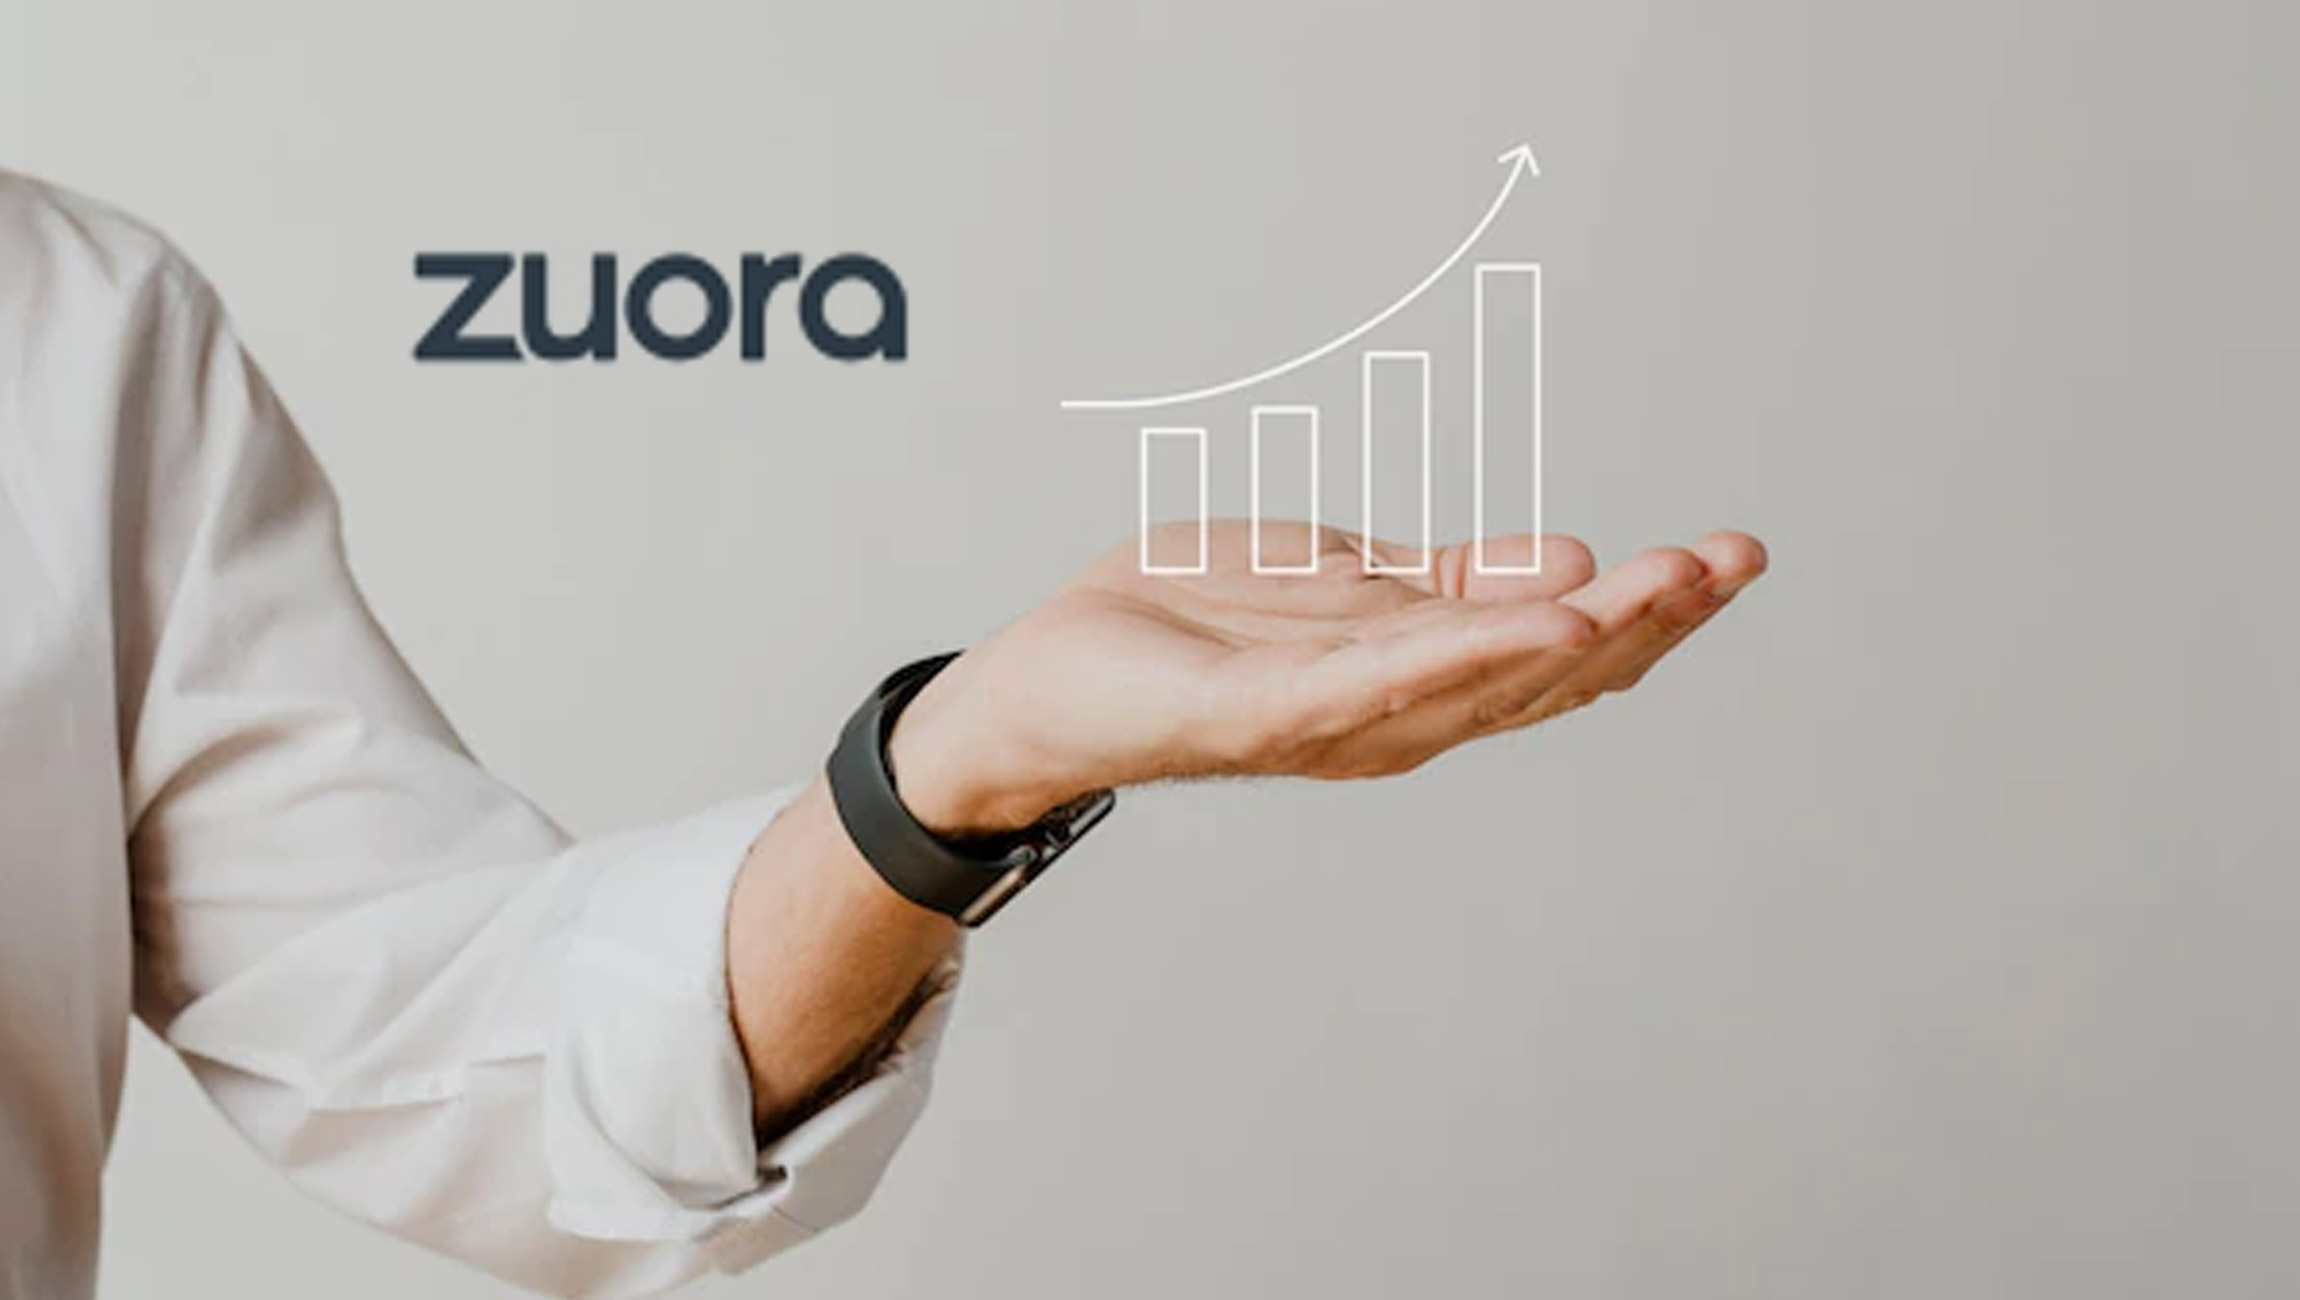 Zuora-Announces-_400-Million-Strategic-Investment-from-Silver-Lake-to-Accelerate-Growth-and-Extend-Leadership-in-the-Subscription-Economy